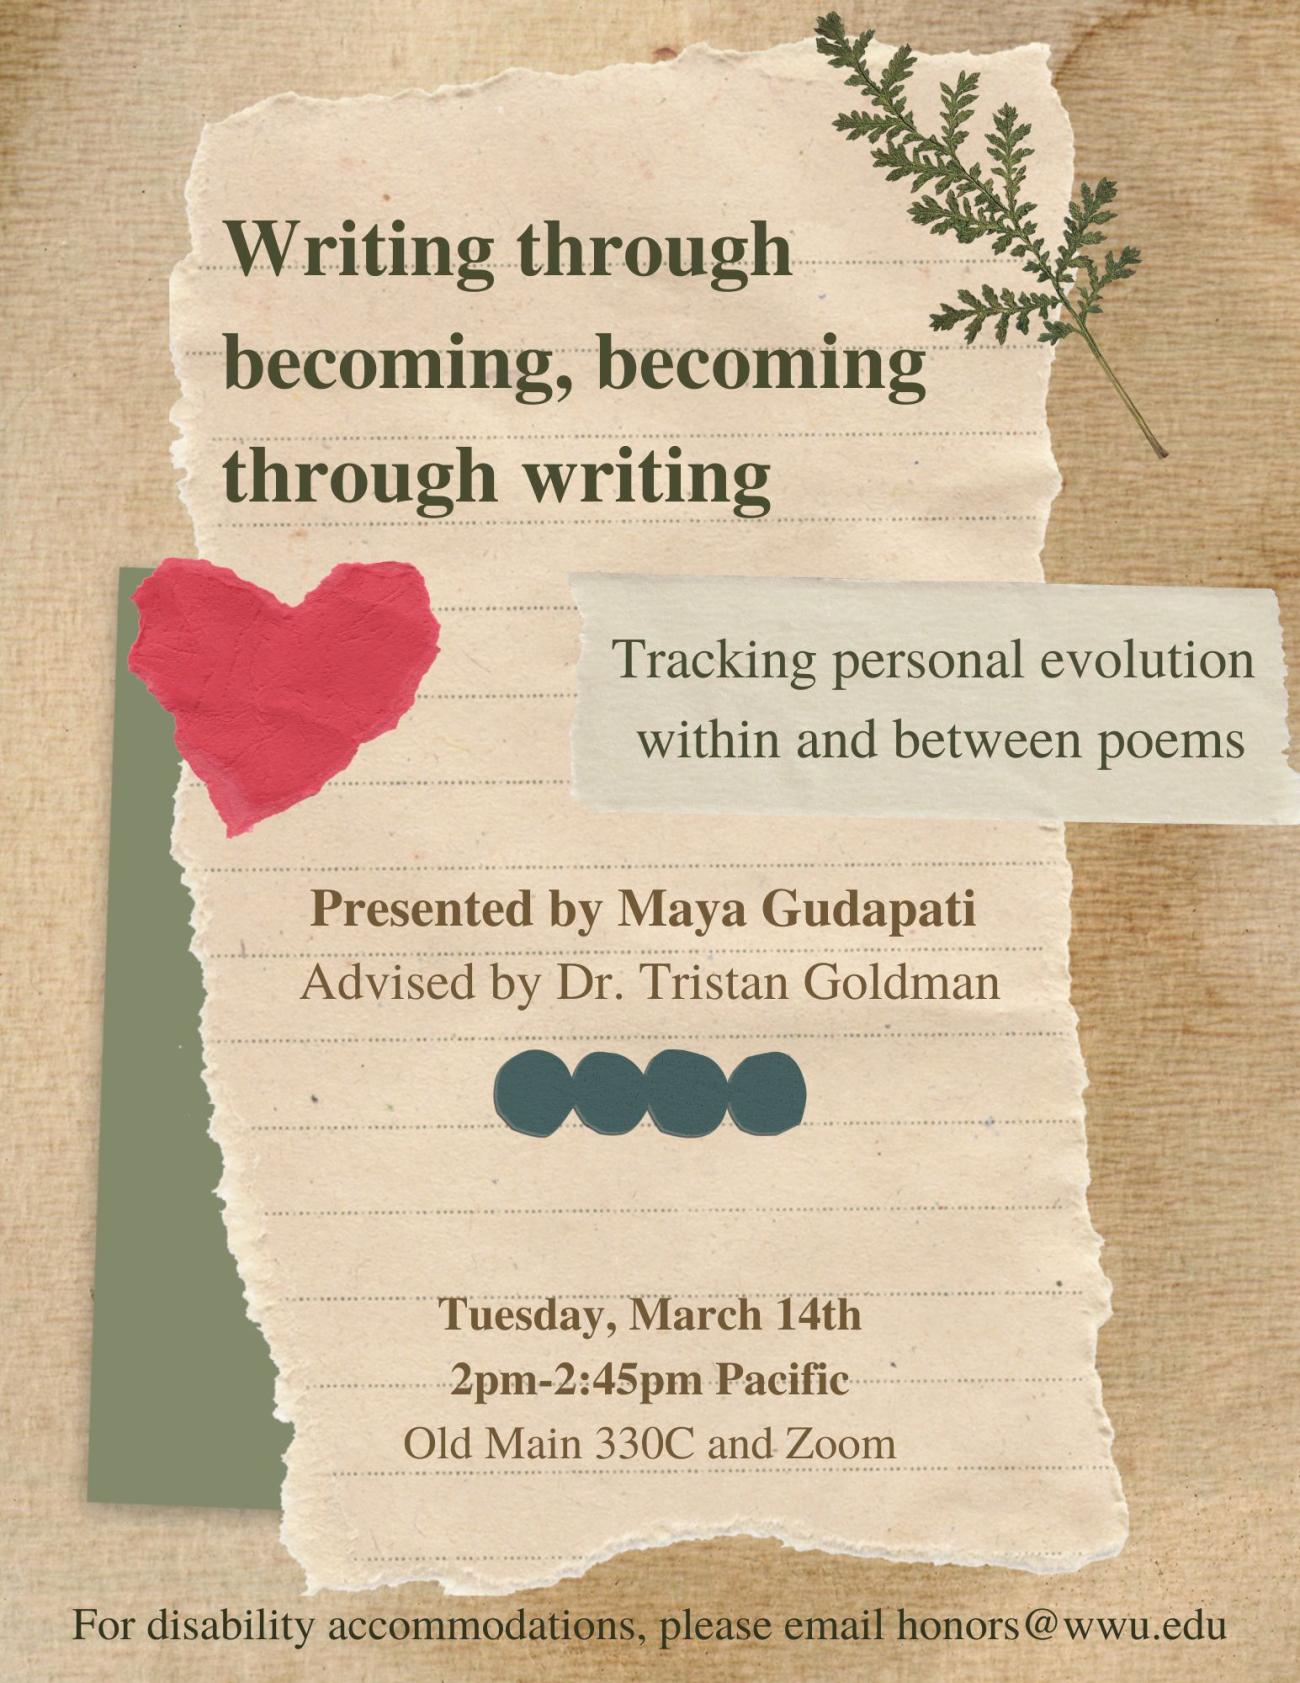 Poster displays tan and green scrapbook paper. Text on paper reads "Writing through becoming, becoming through writing: Tracking personal evolution within and between poems. Presented by Maya Gudapati, advised by Dr, Tristan Goldman. Tuesday, March 14th, 2pm-2:45pm Pacific. Old Main 330c and Zoom. For disability accommodations, please email honors@wwu.edu." Poster decorated with a dried green leaf in the top-right corner and a red construction paper heart on the left.